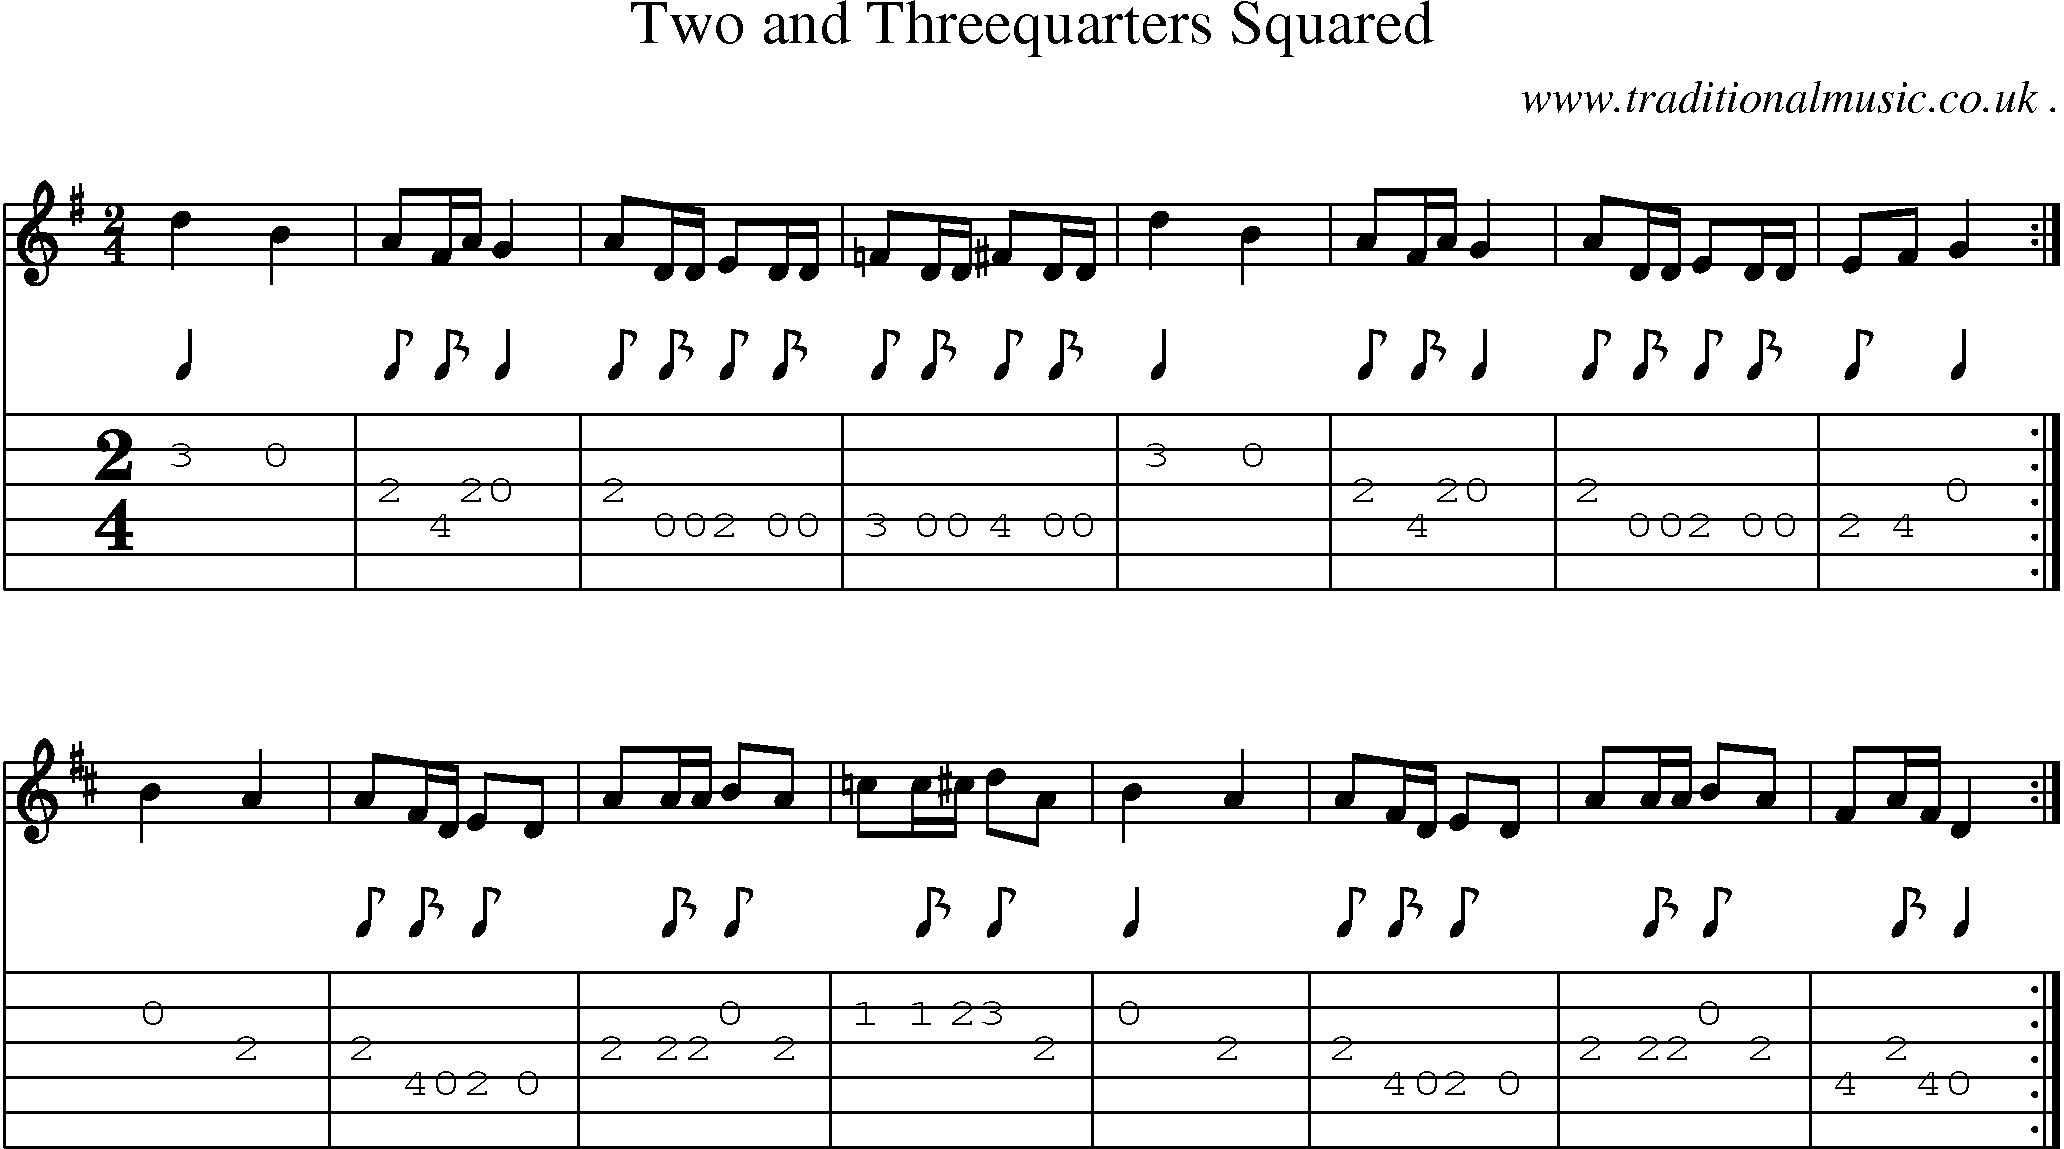 Sheet-Music and Guitar Tabs for Two And Threequarters Squared